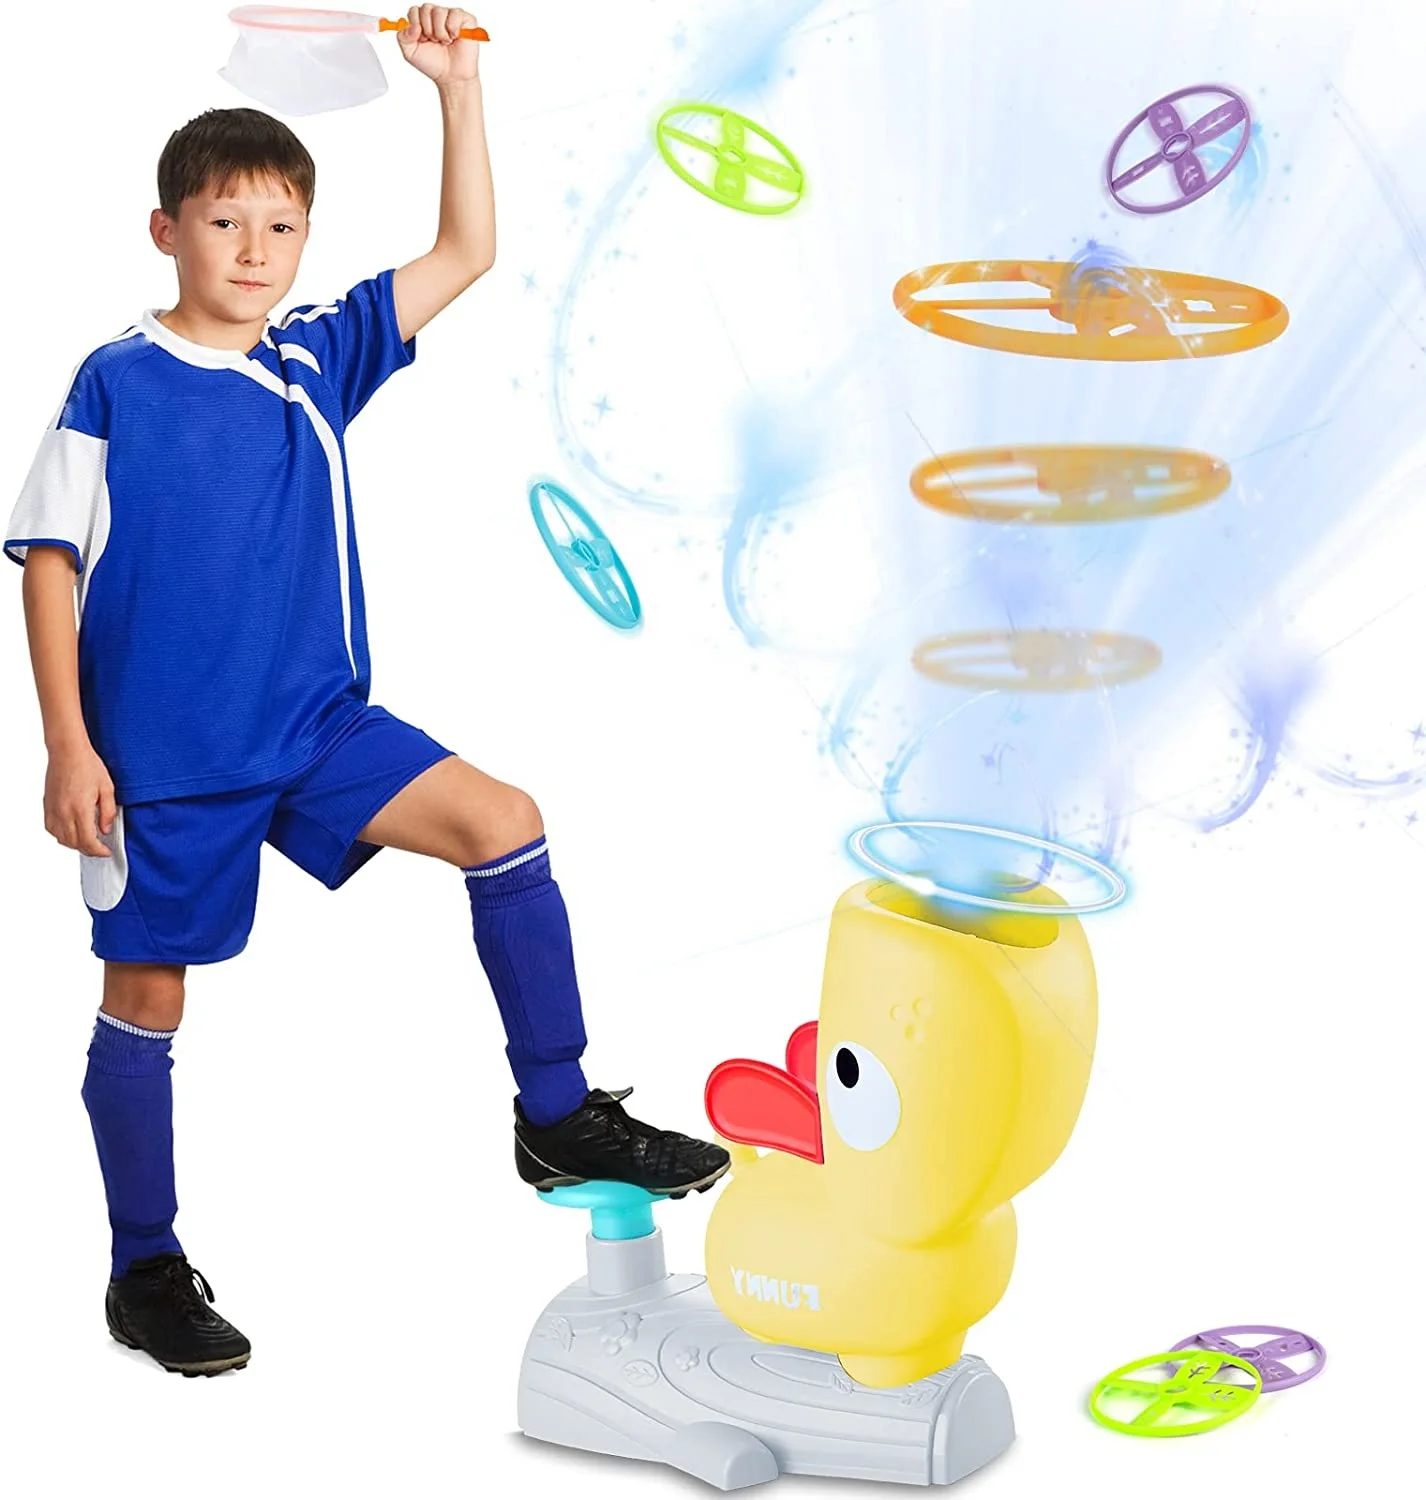 

Flying Discs Launcher Toy for Kids Launch Flying Saucer Disc Shooter Toy Indoor Outdoor Toys for Yard Park with Flying Spinners